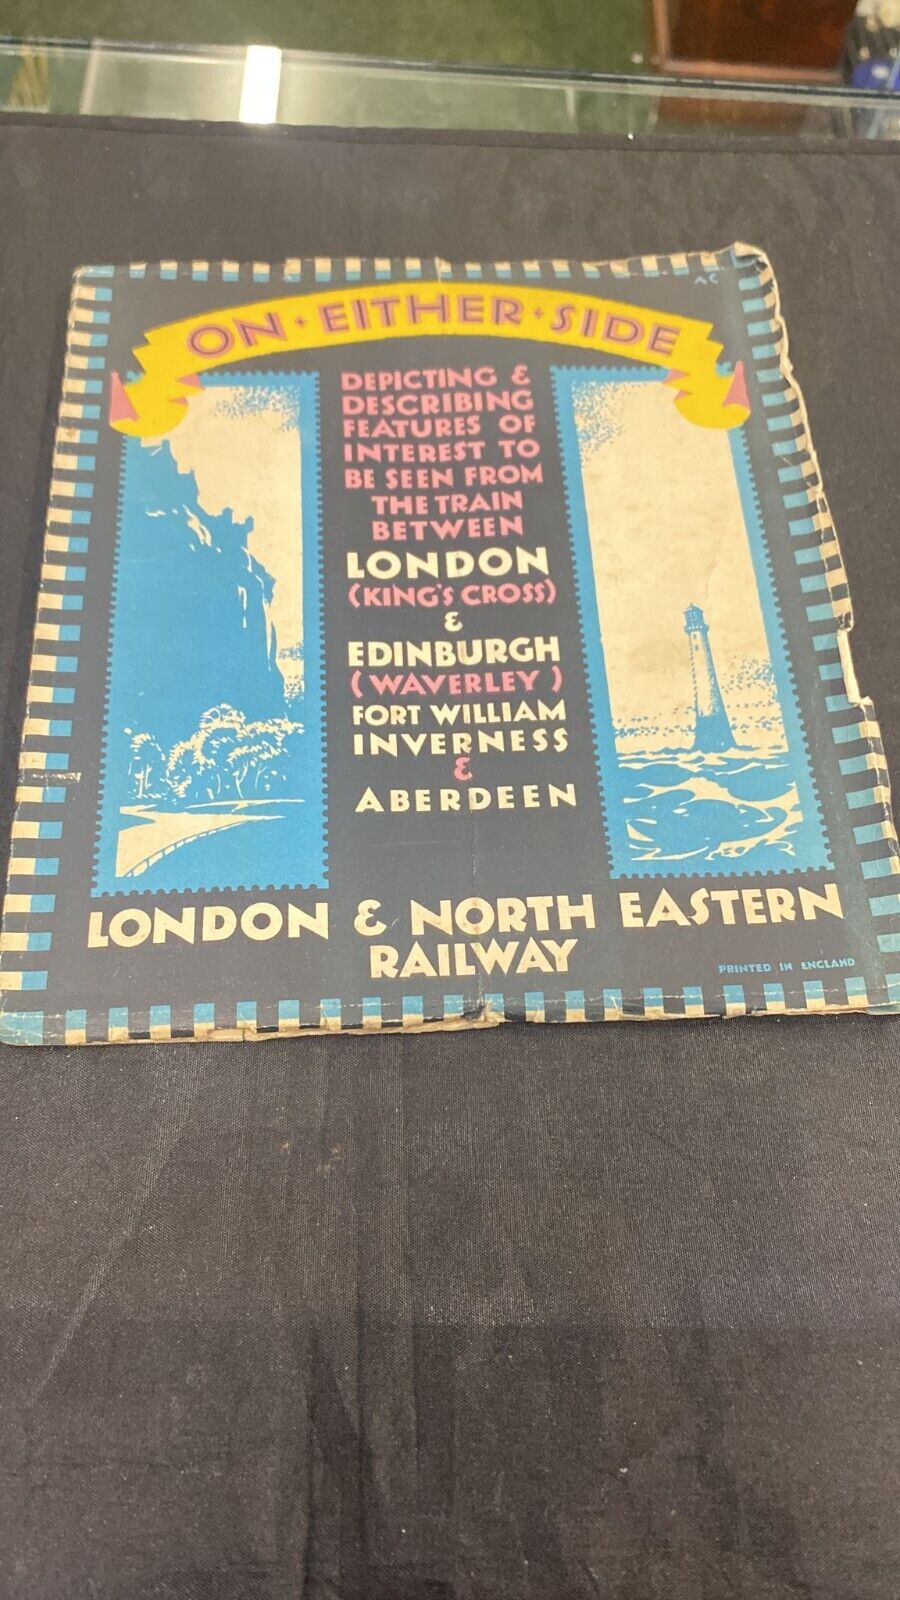 London & North Eastern Railway On Either Side Book View From Window & Map  Ref 5